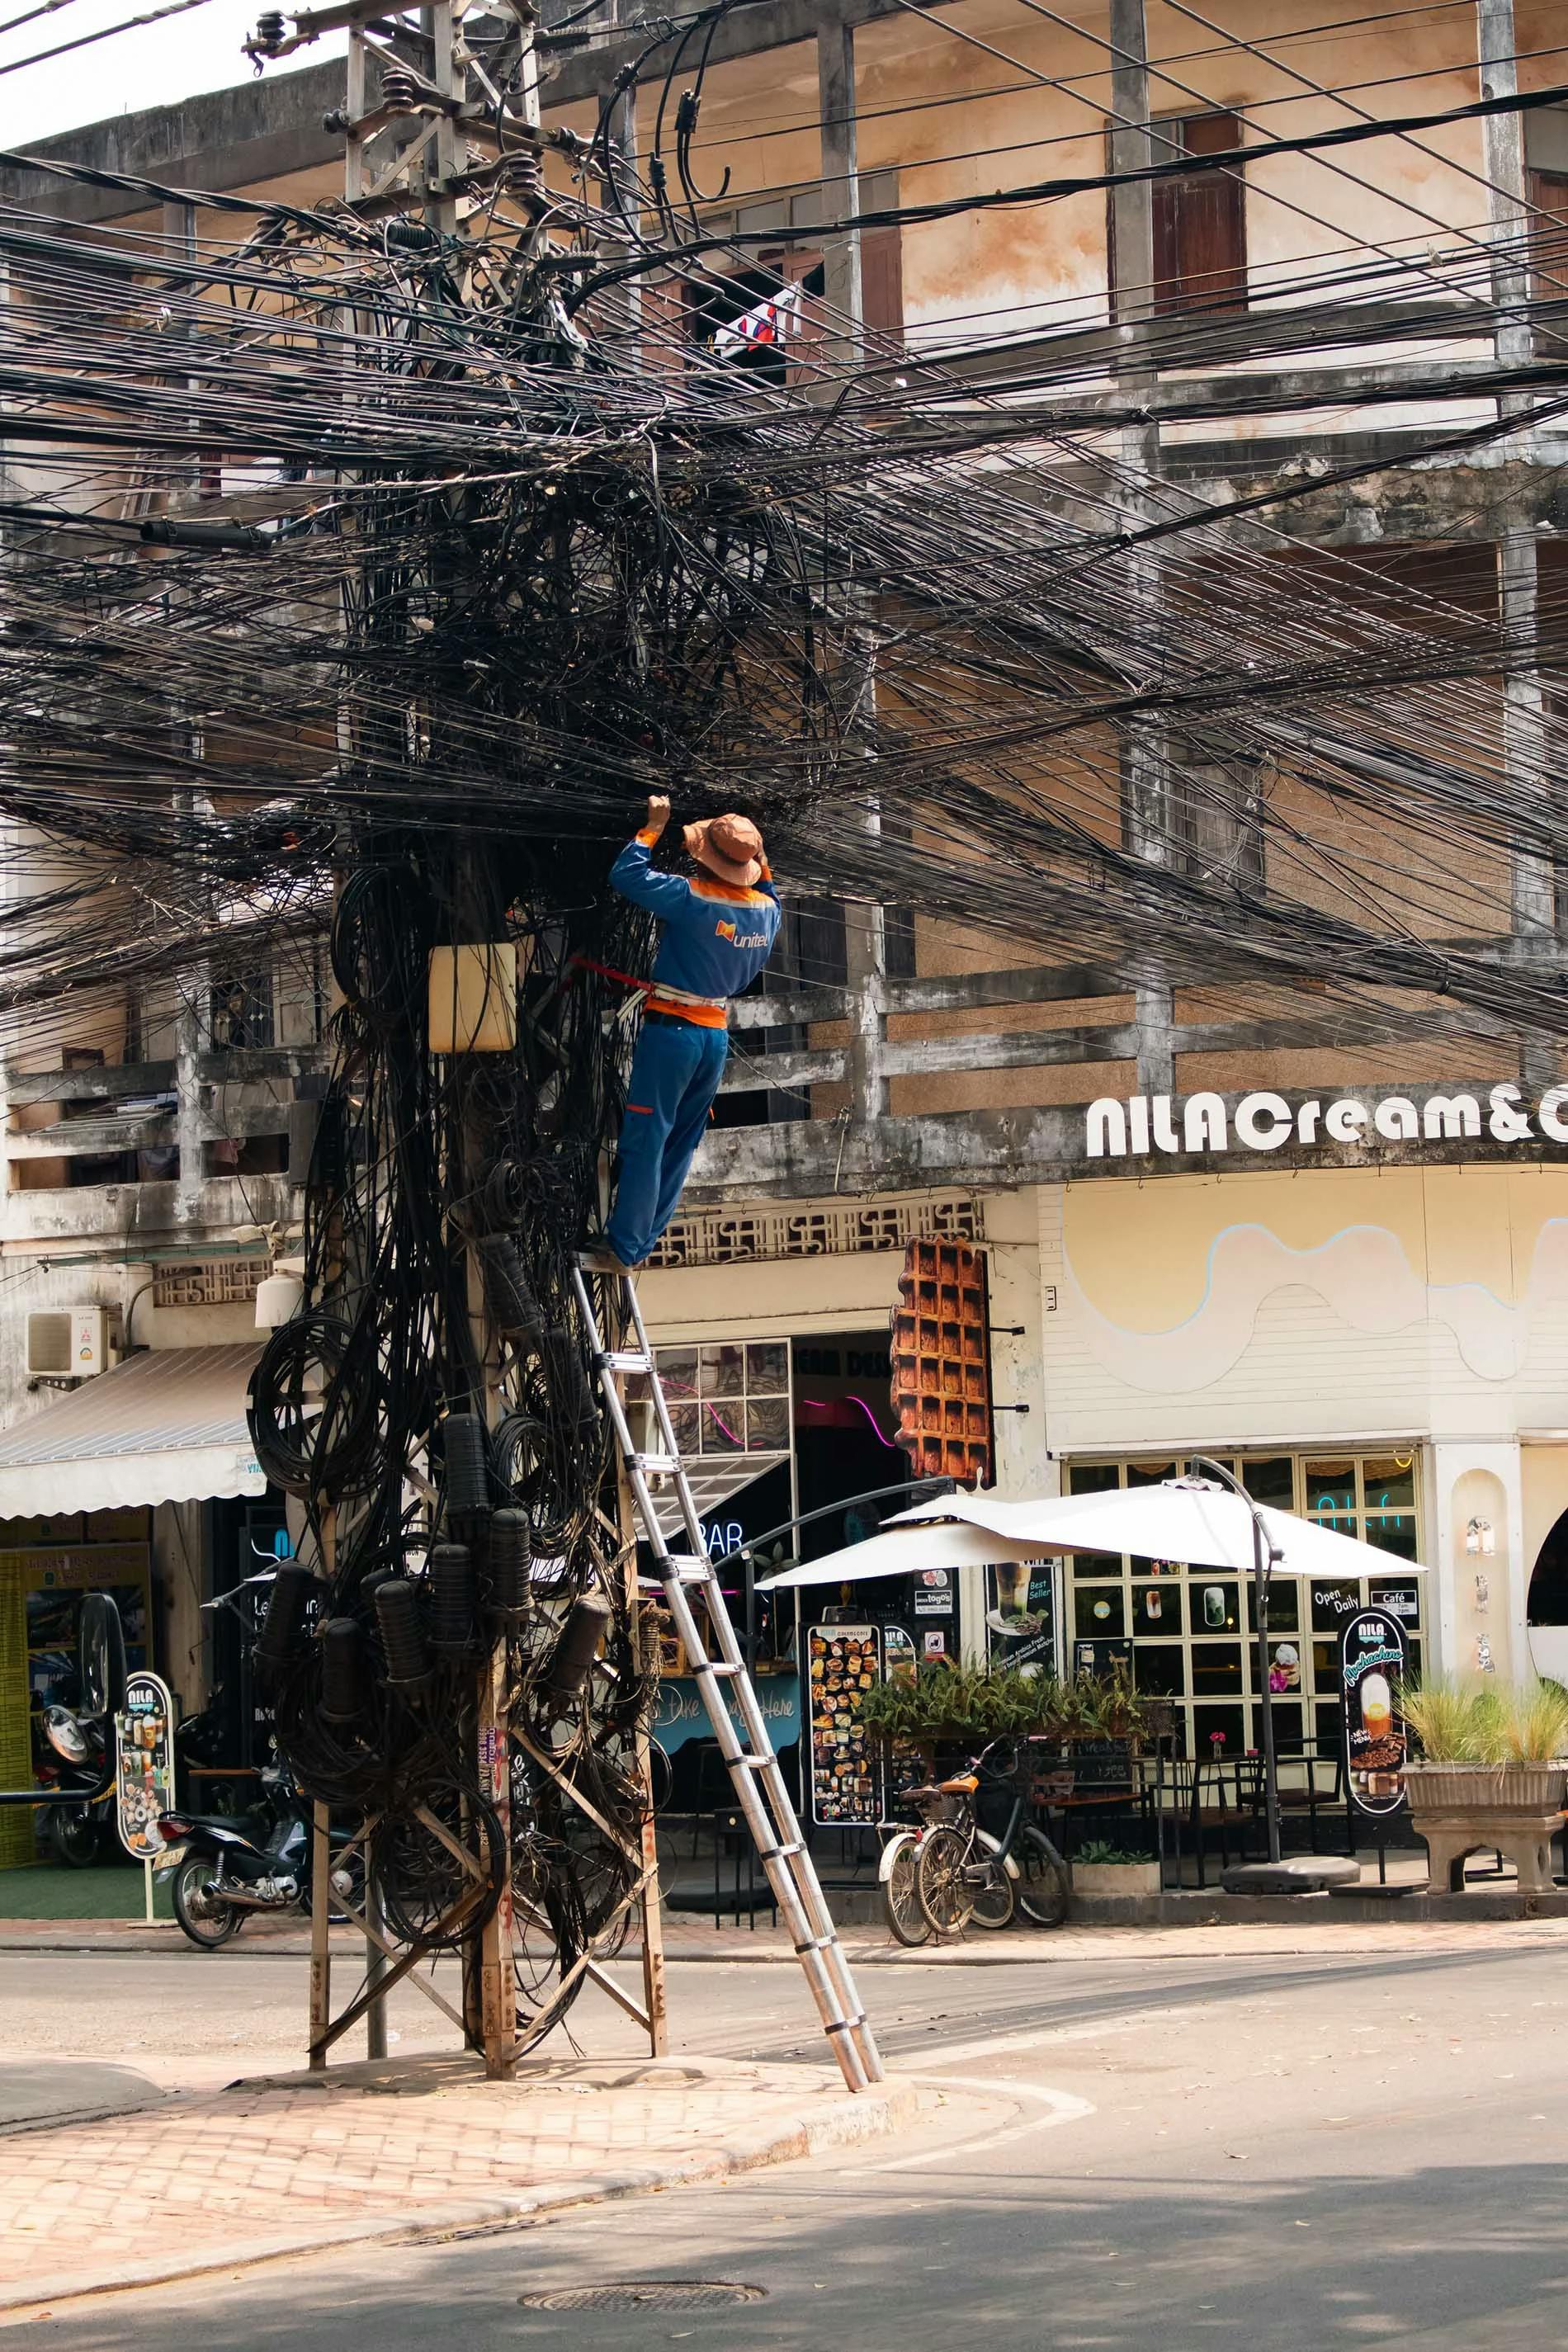 a man on a step ladder working with a lot of cable in Vientiane (Laos). The man is wearing a yellow helmet and a blue shirt